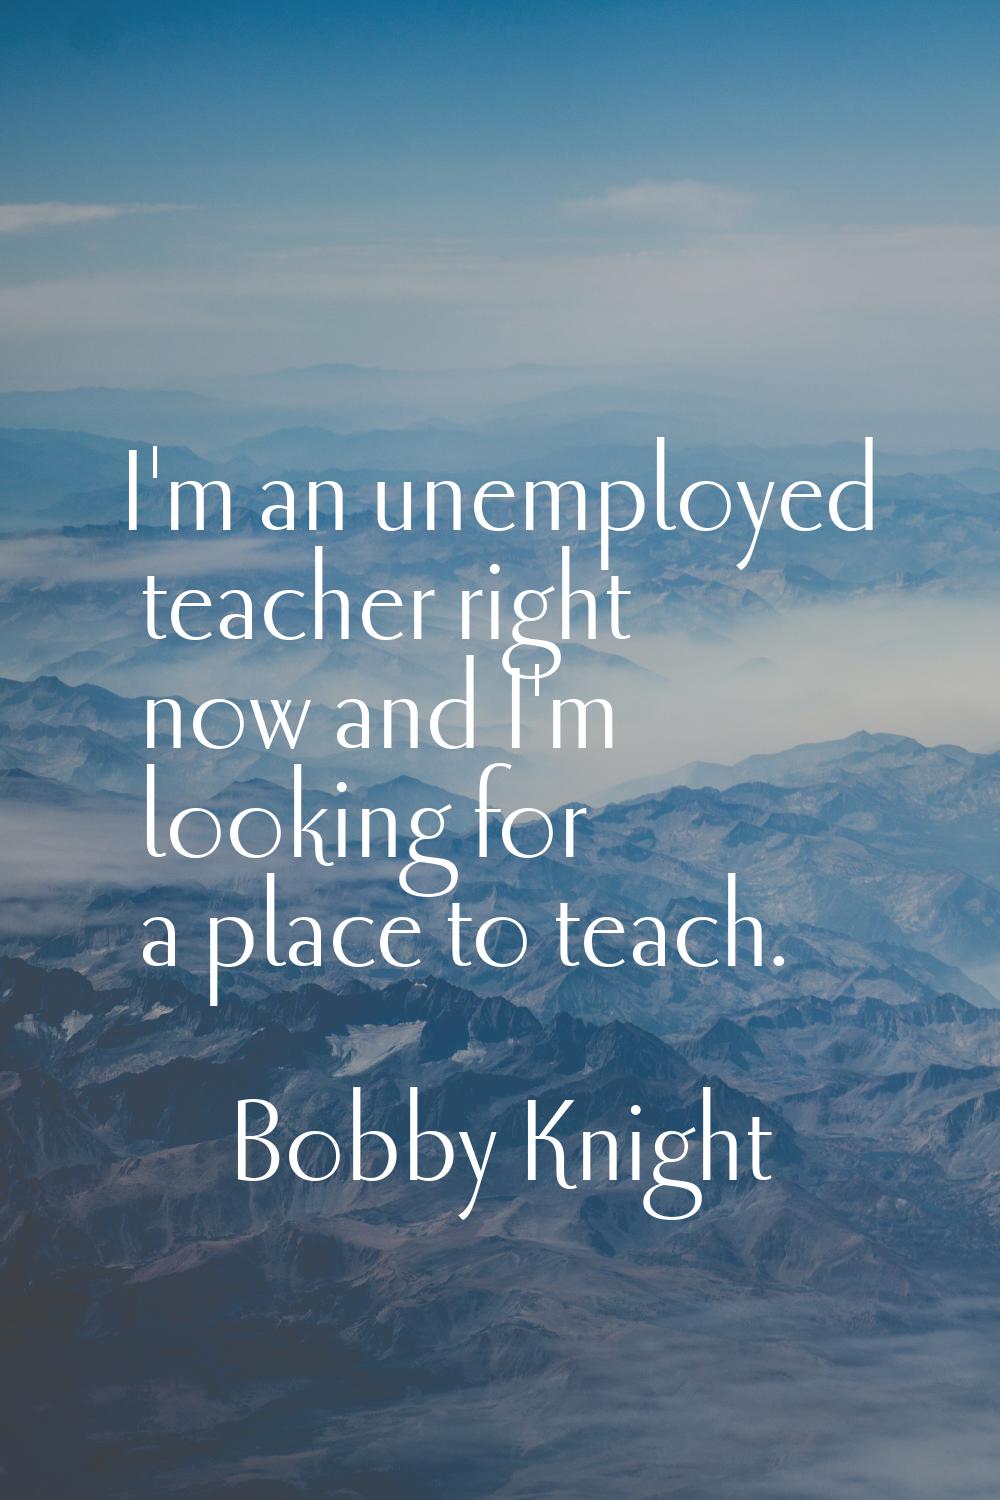 I'm an unemployed teacher right now and I'm looking for a place to teach.